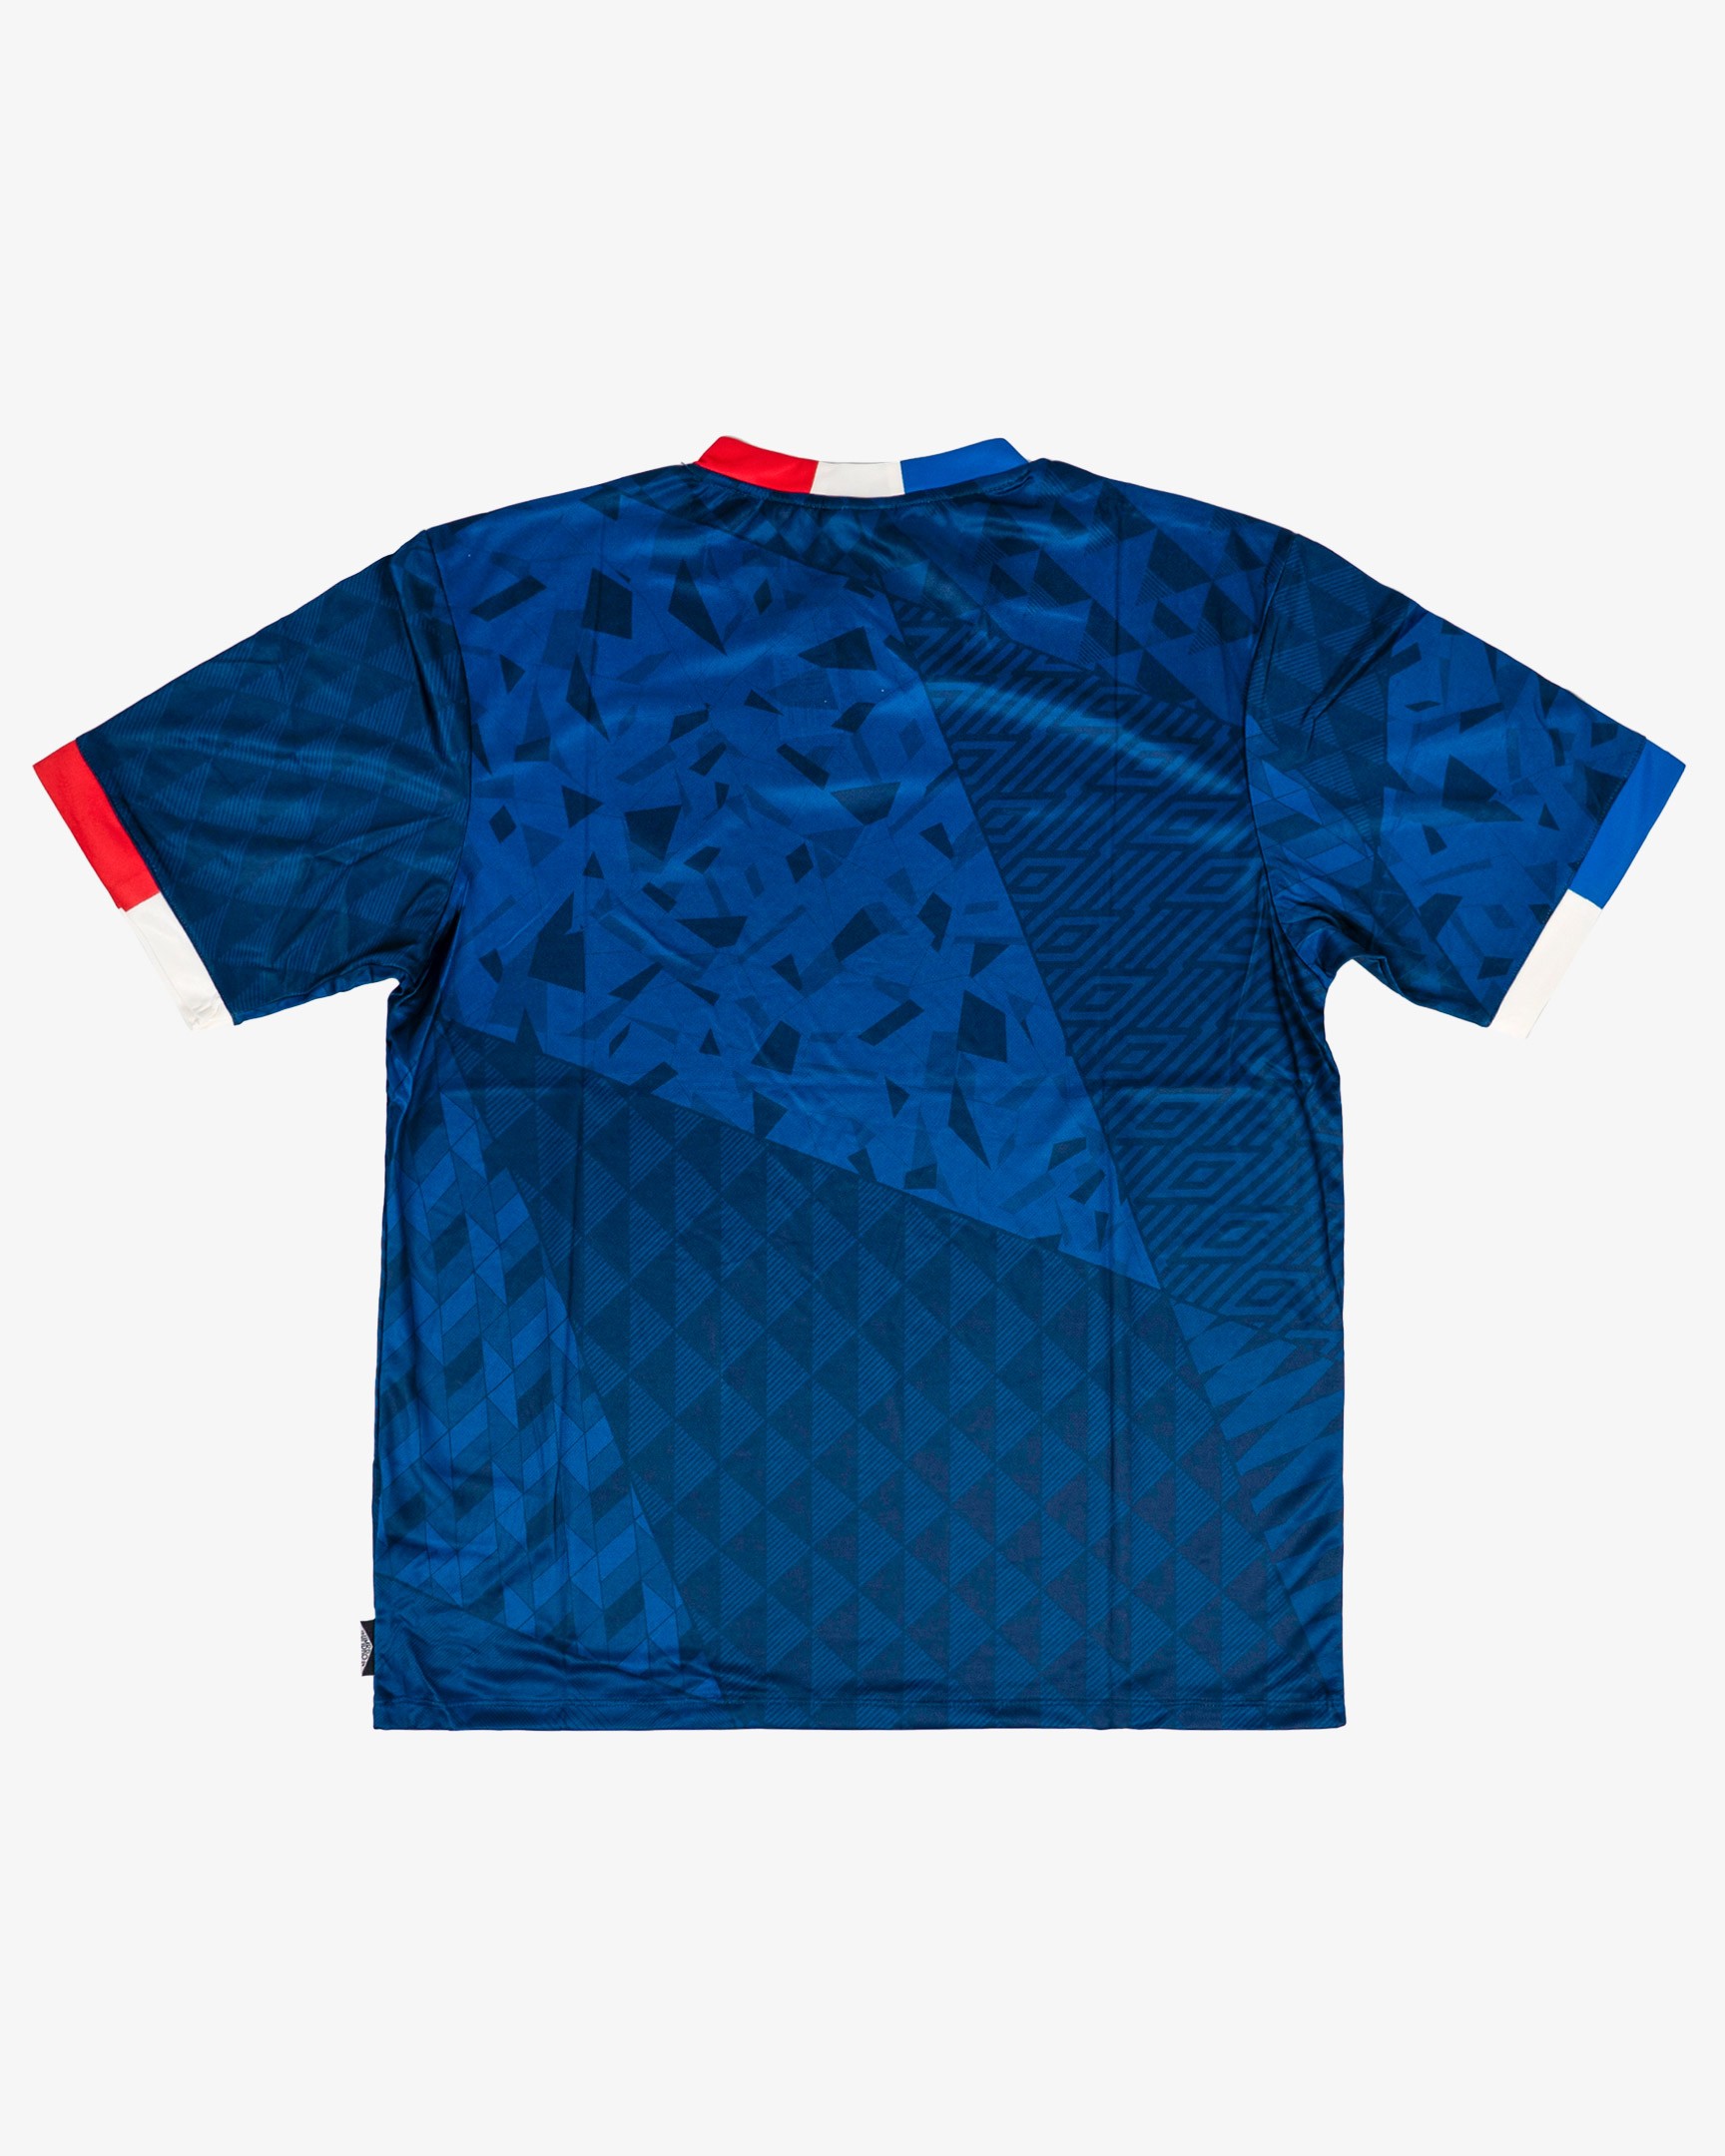 FRANCE ICONIC GRAPHIC JERSEY